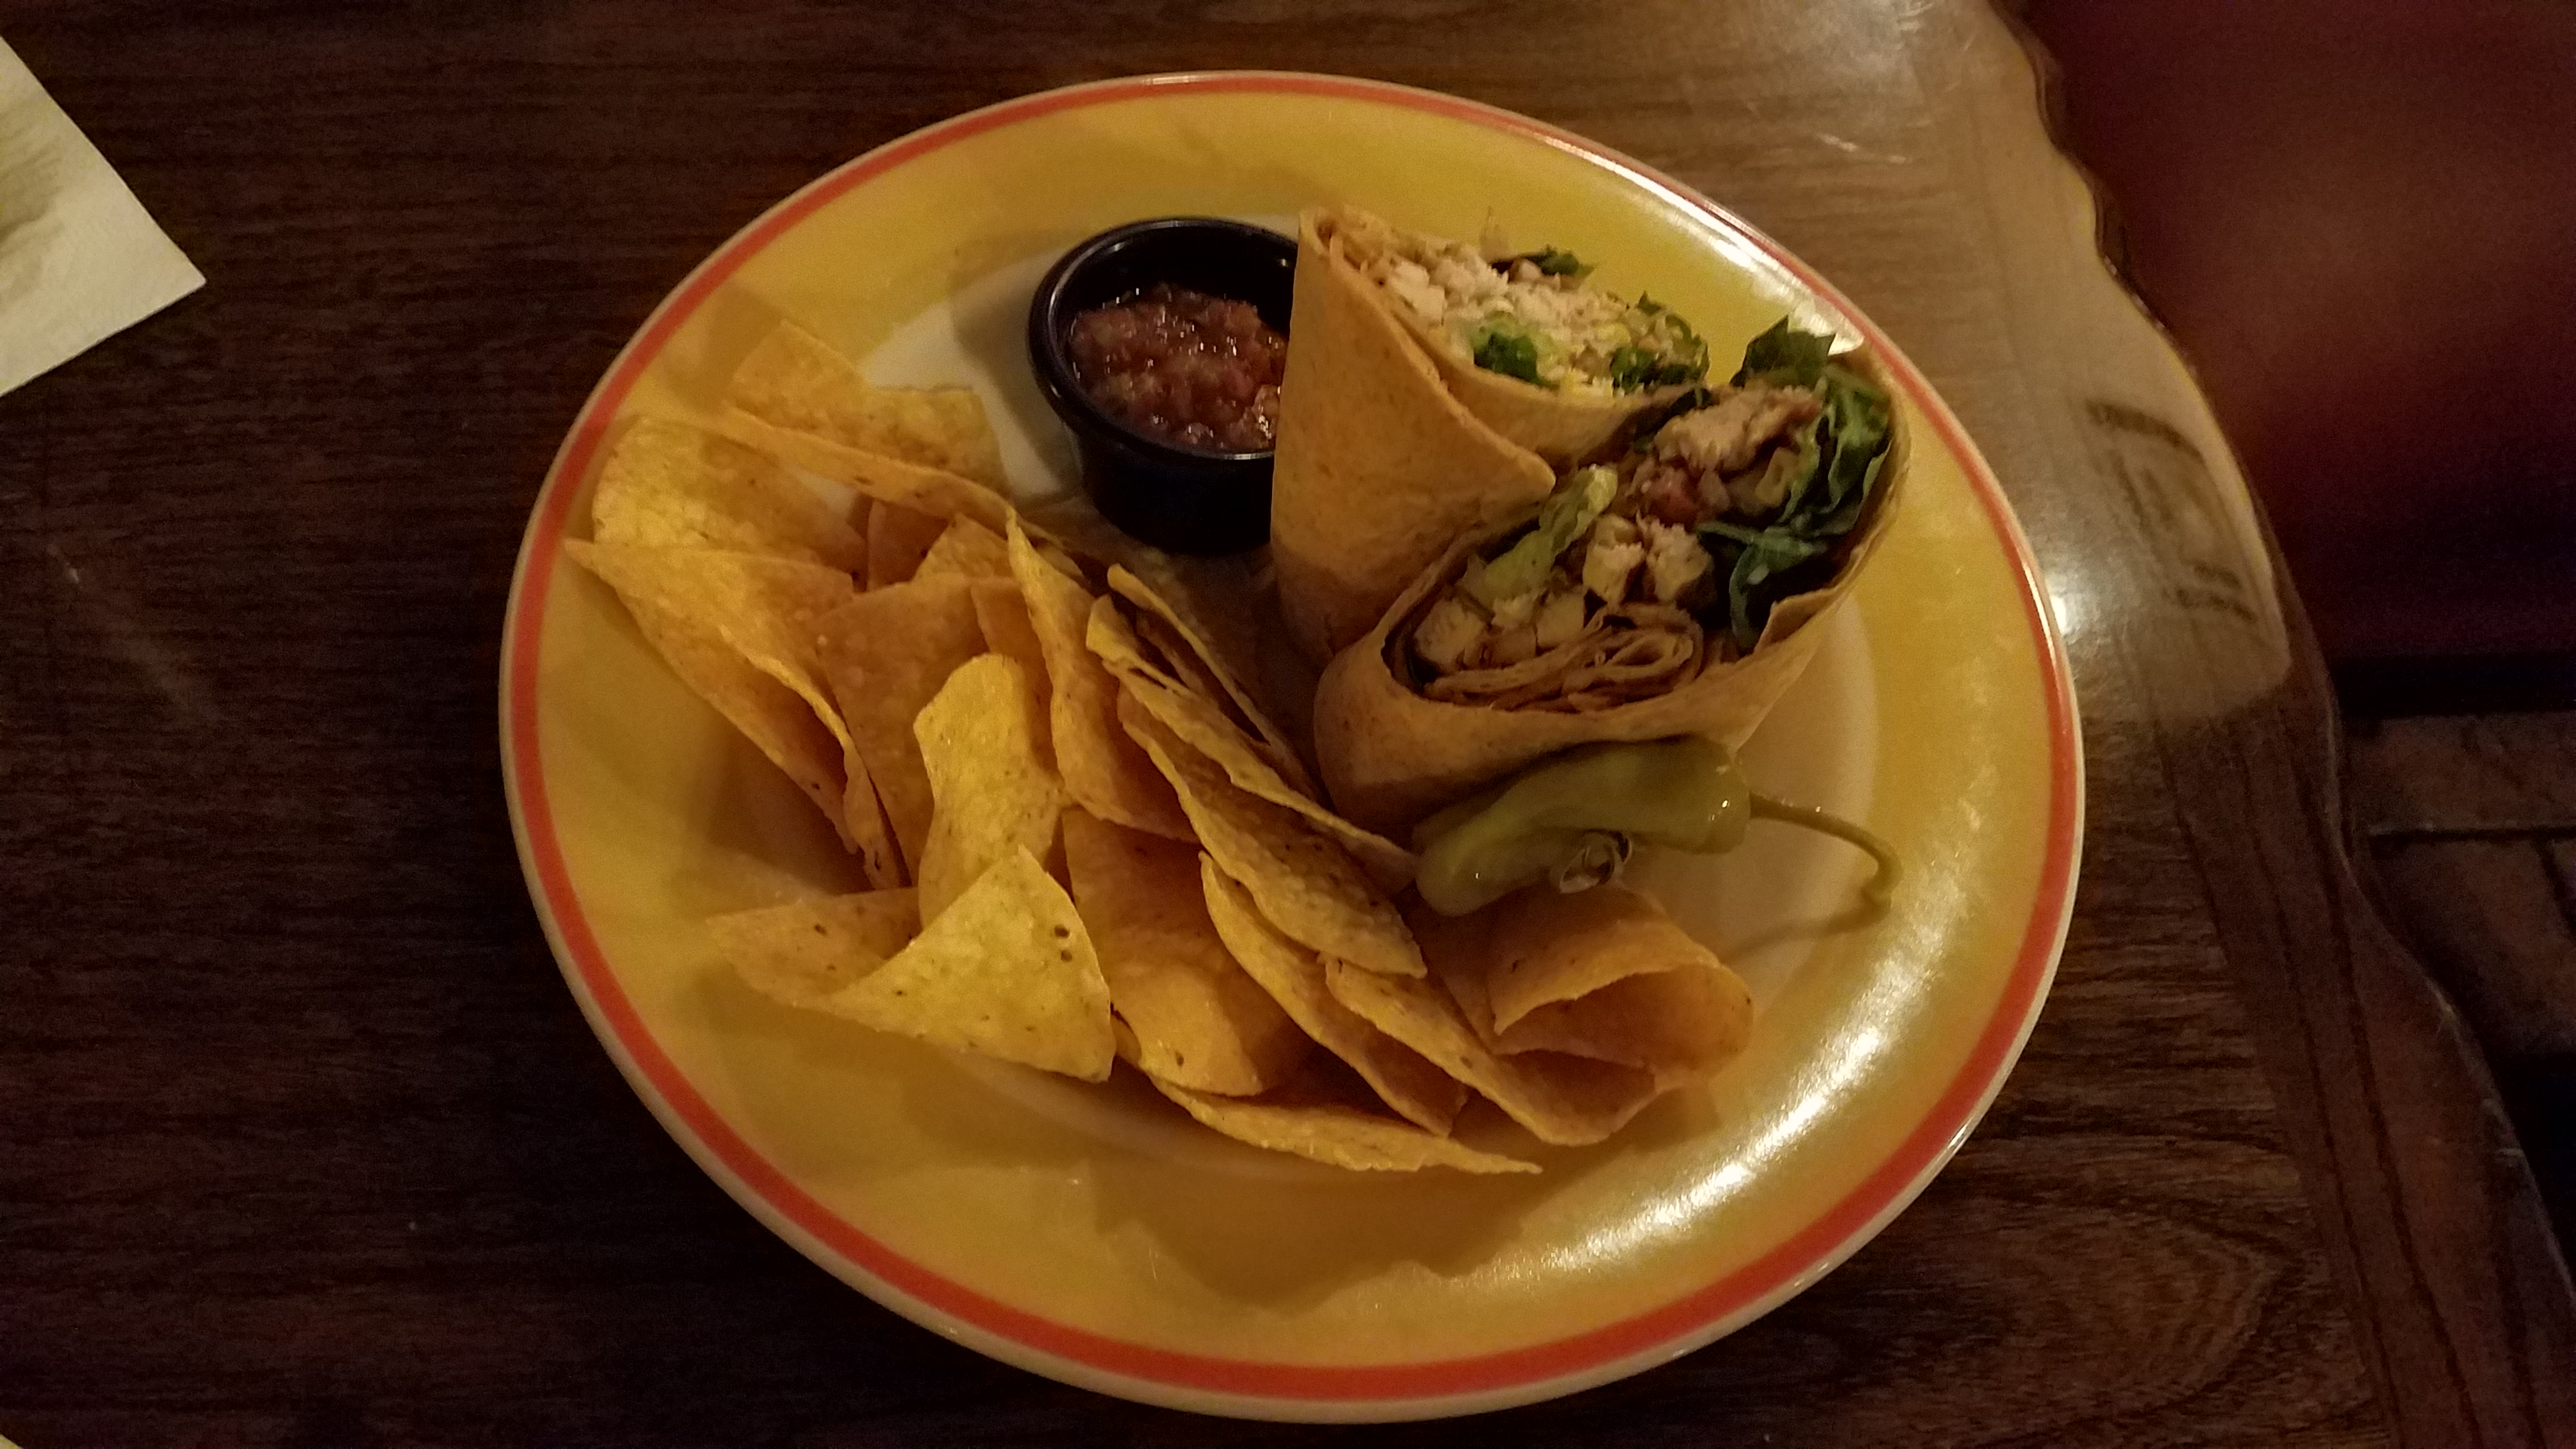 Tex-Mex Wrap at Confisco Grille - Dining Review - Islands of Adventure - Universal Orlando Resort - unofficialuniversal.com.